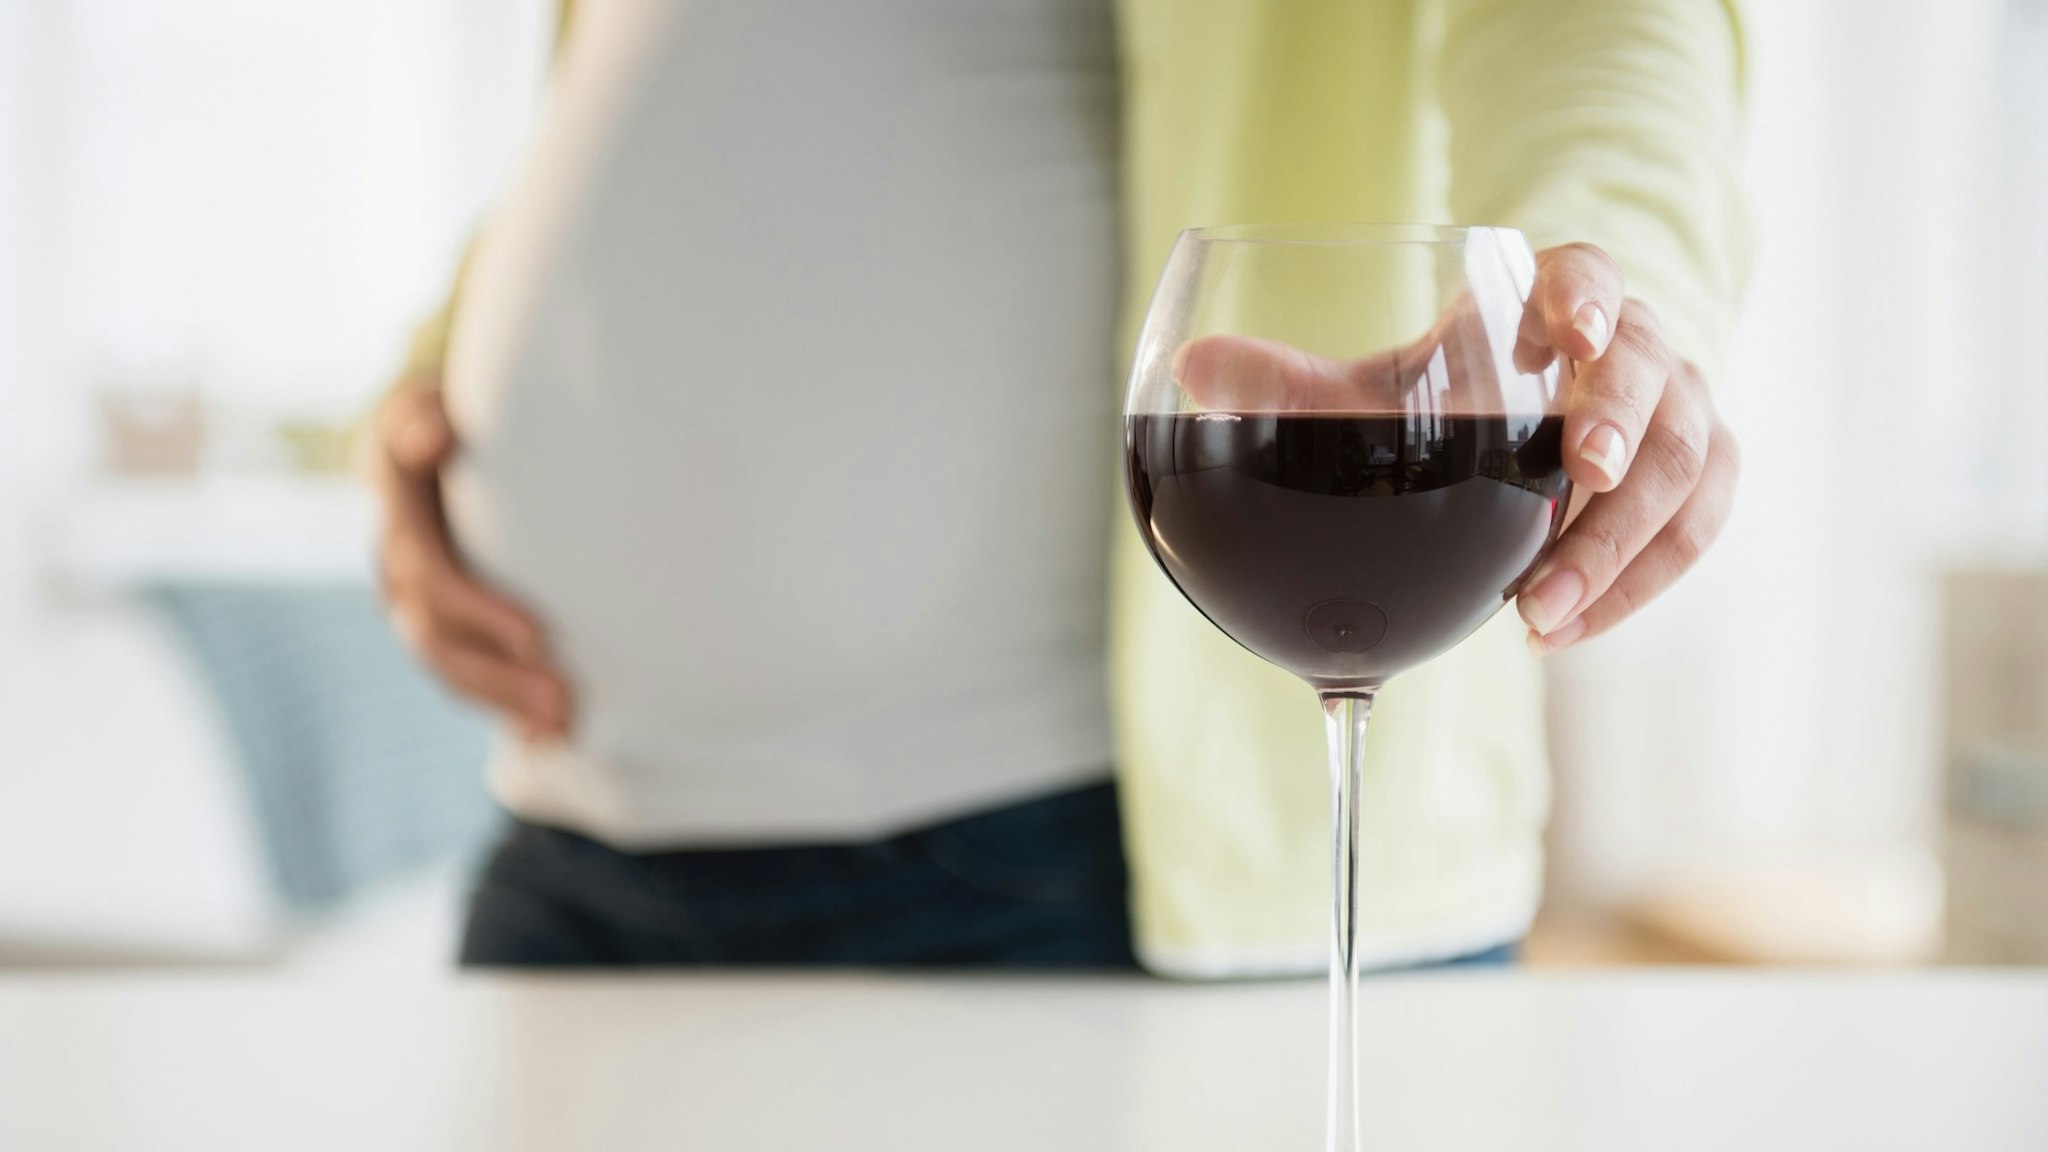 Pregnant woman with glass of red wine - stock photo Jamie Grill via Getty Images